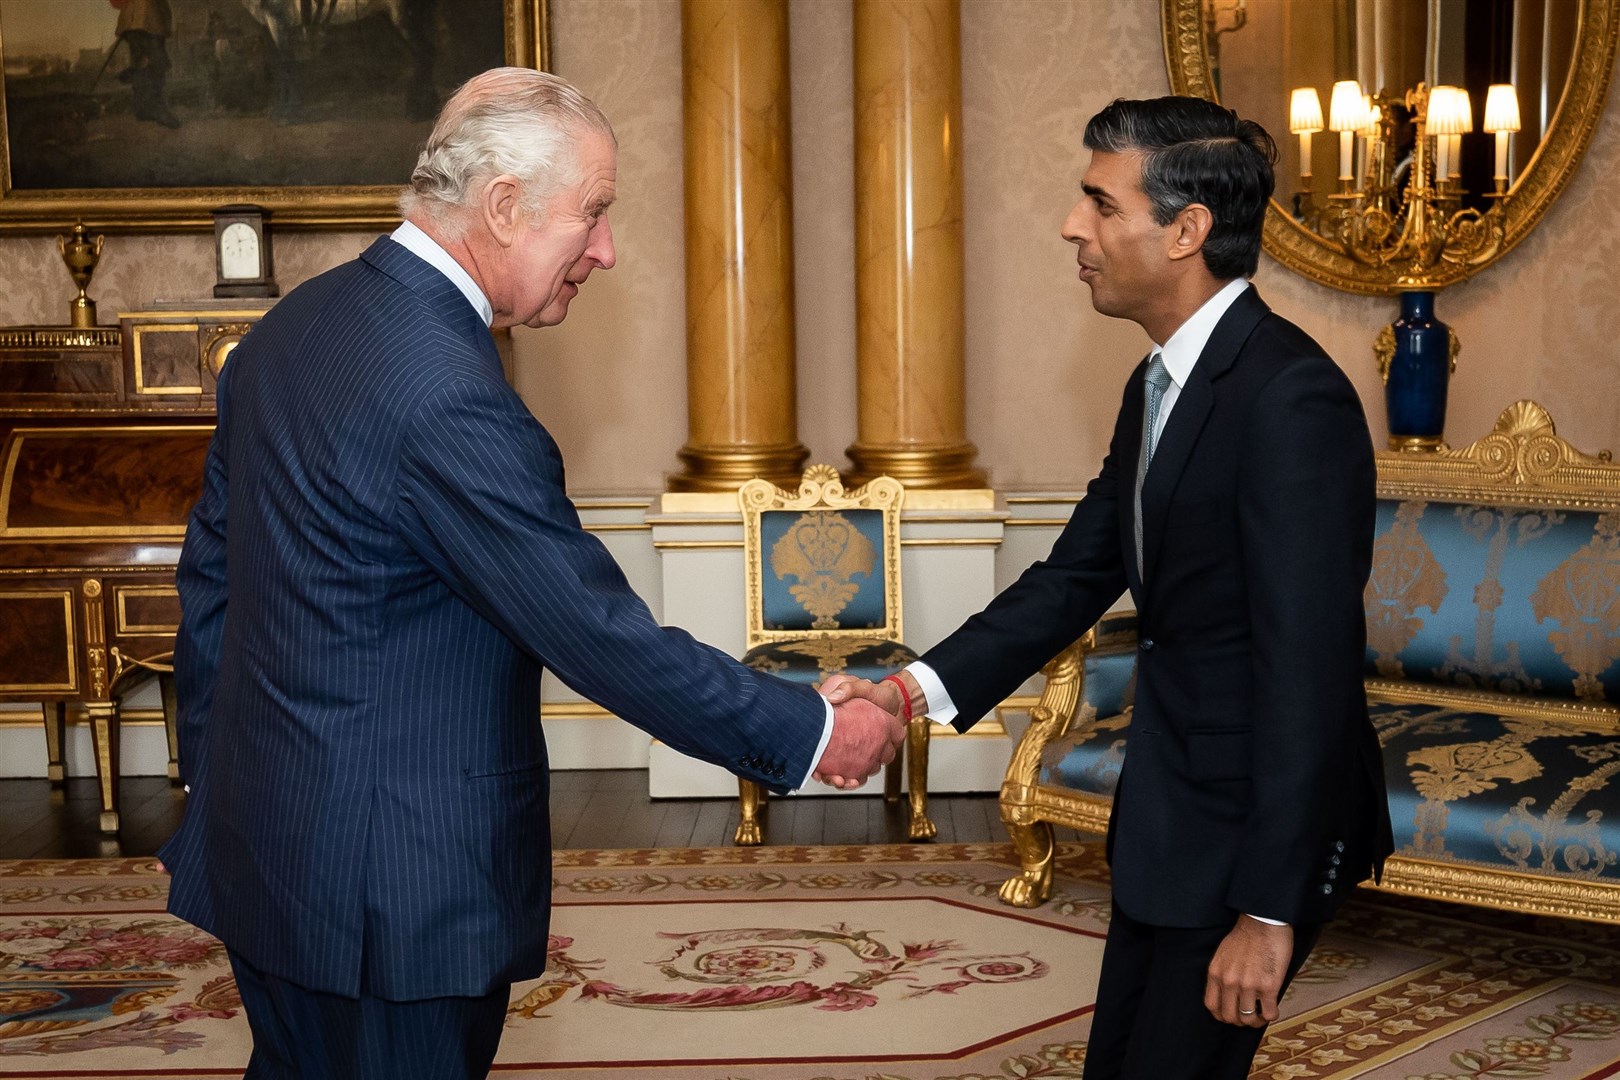 Rishi Sunak said the ‘sacred bond’ between country and monarch continues under the King (Aaron Chown/PA)